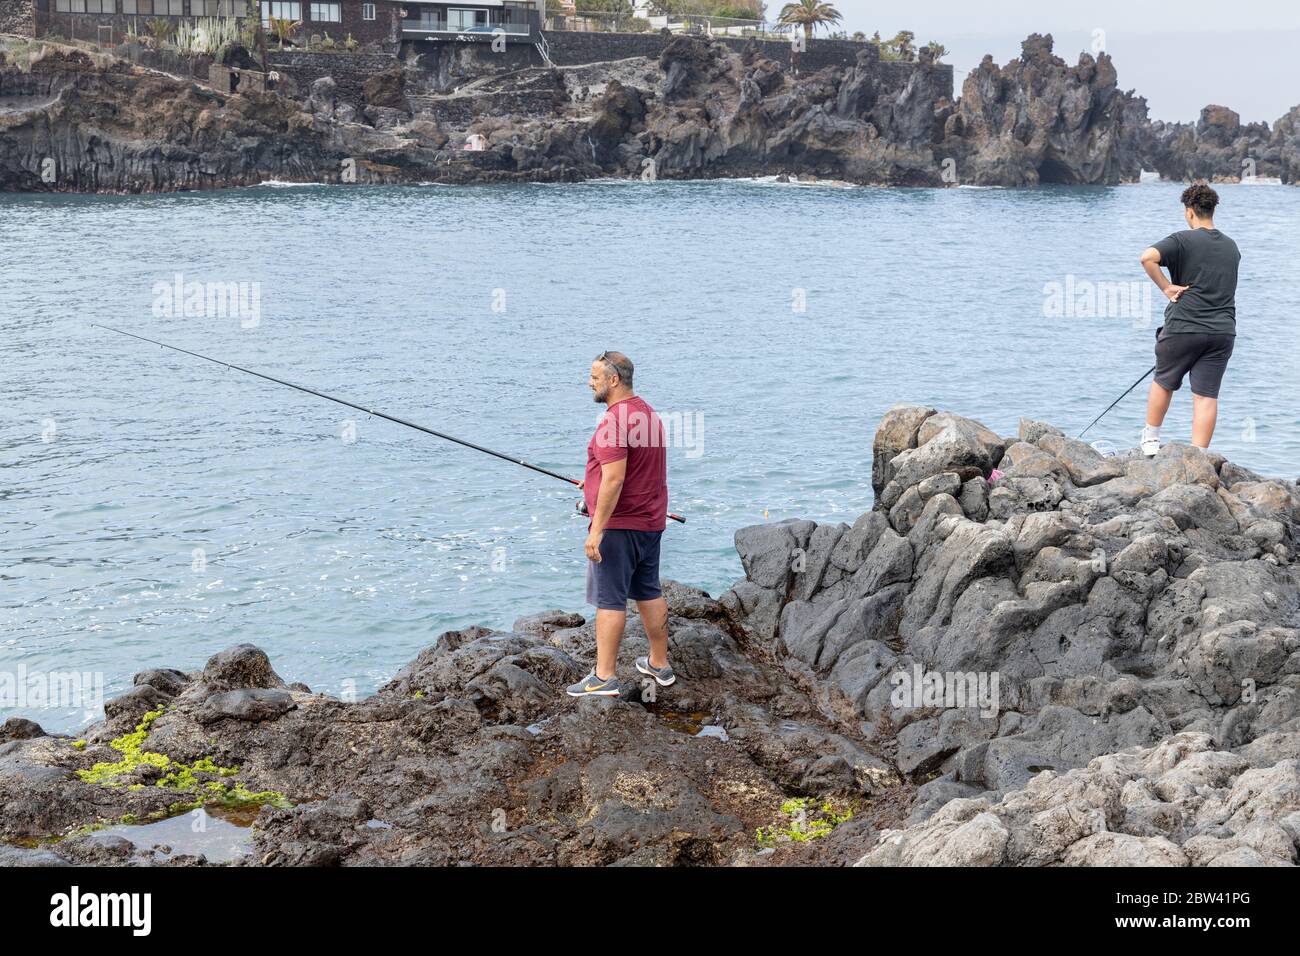 Fishermen on the rocks by the beach with sections to seperate people by two metres, social distancing rules, Phase two de-escalation of the Covid 19, Stock Photo